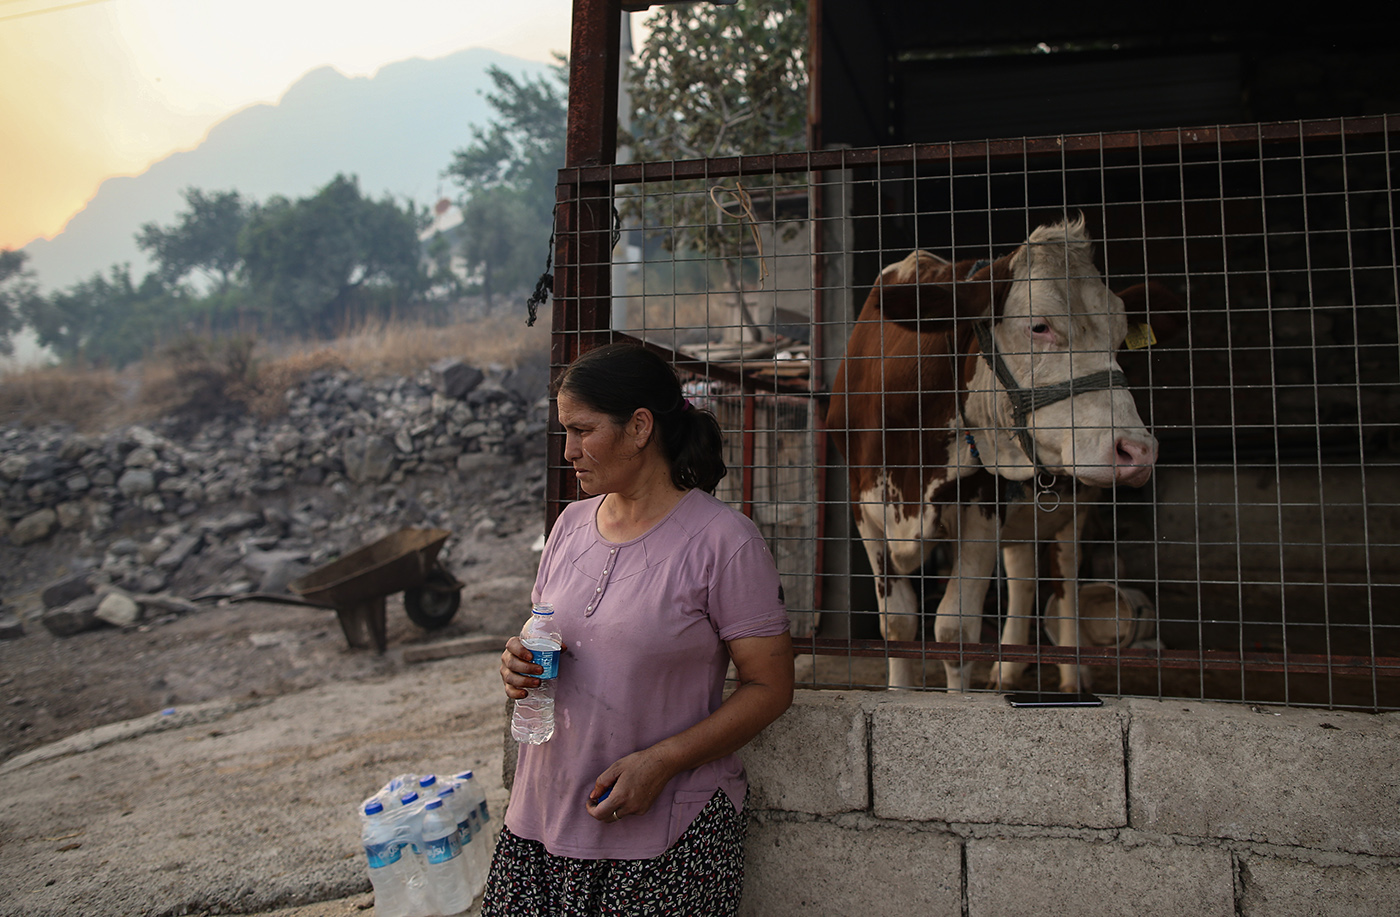 A woman stands with her animals during the wildfires at the Bozdogan village of the Milas district of Mugla, Turkey, 02 August 2021. Turkish Health minister Fahrettin Koca confirmed that eight people have lost their lives due to the wildfires raging in Turkey’s Mediterranean towns.